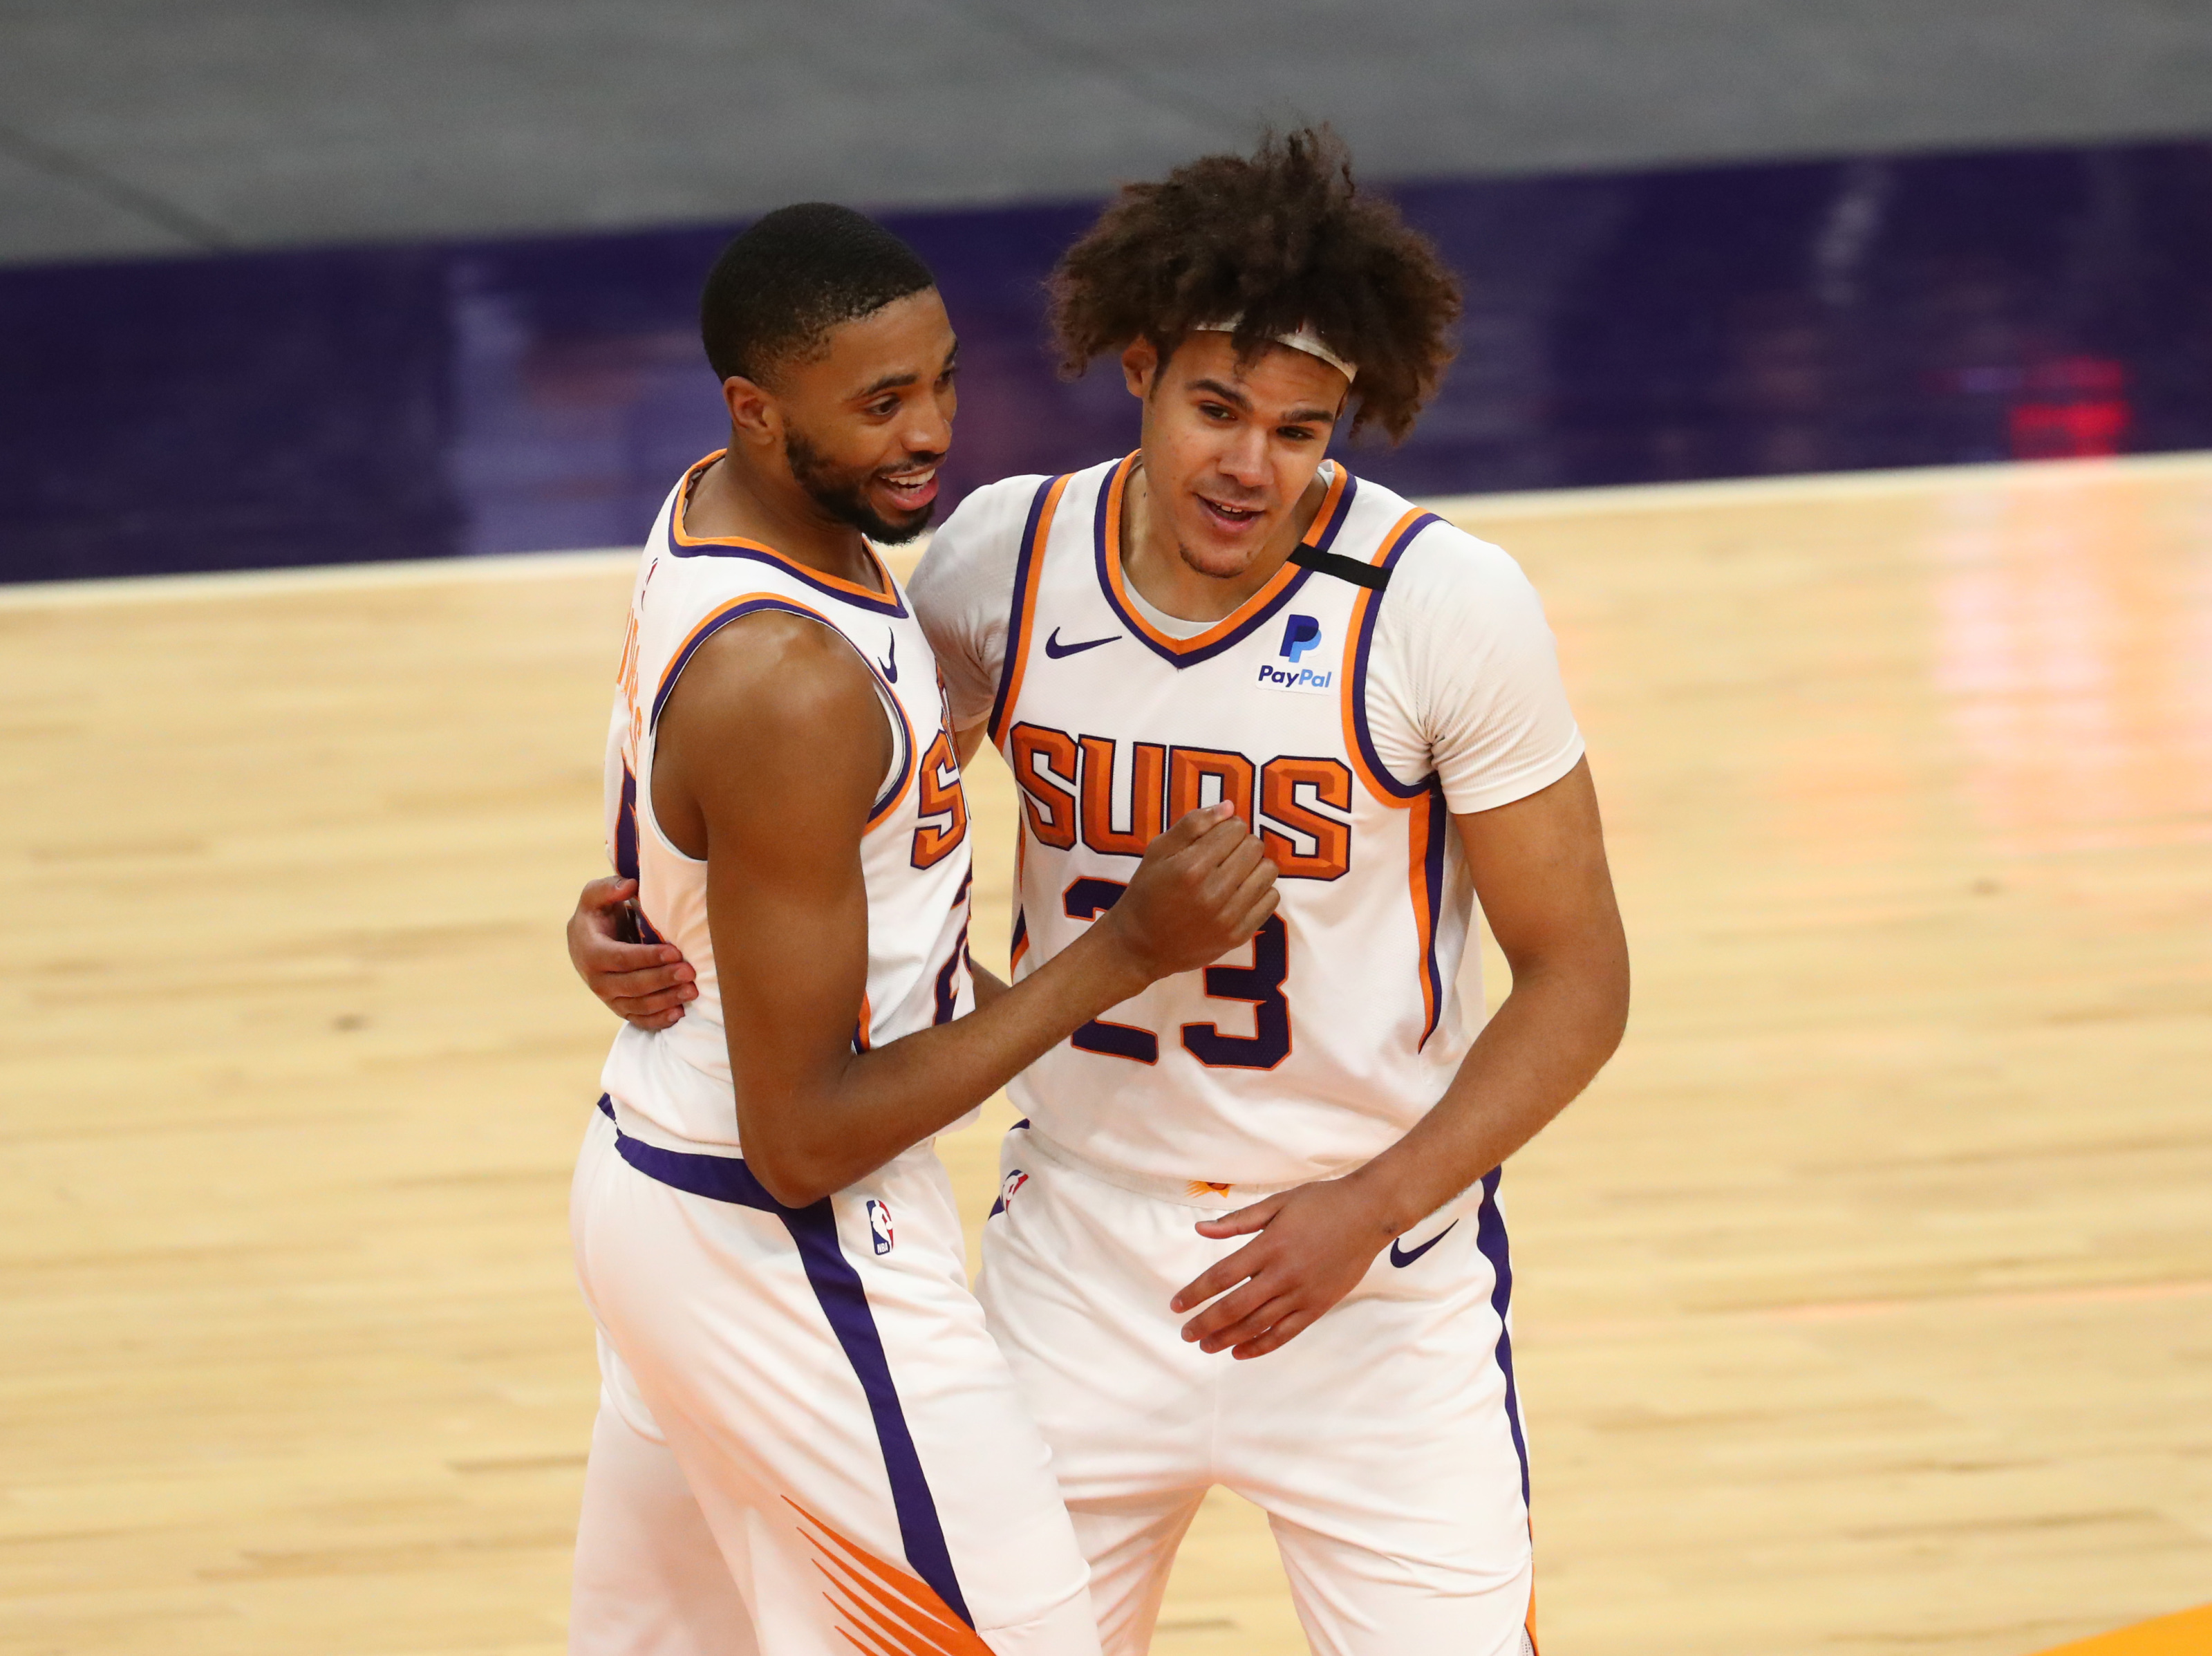 Cameron Johnson detailed why he chose to wear No. 23 with the Suns